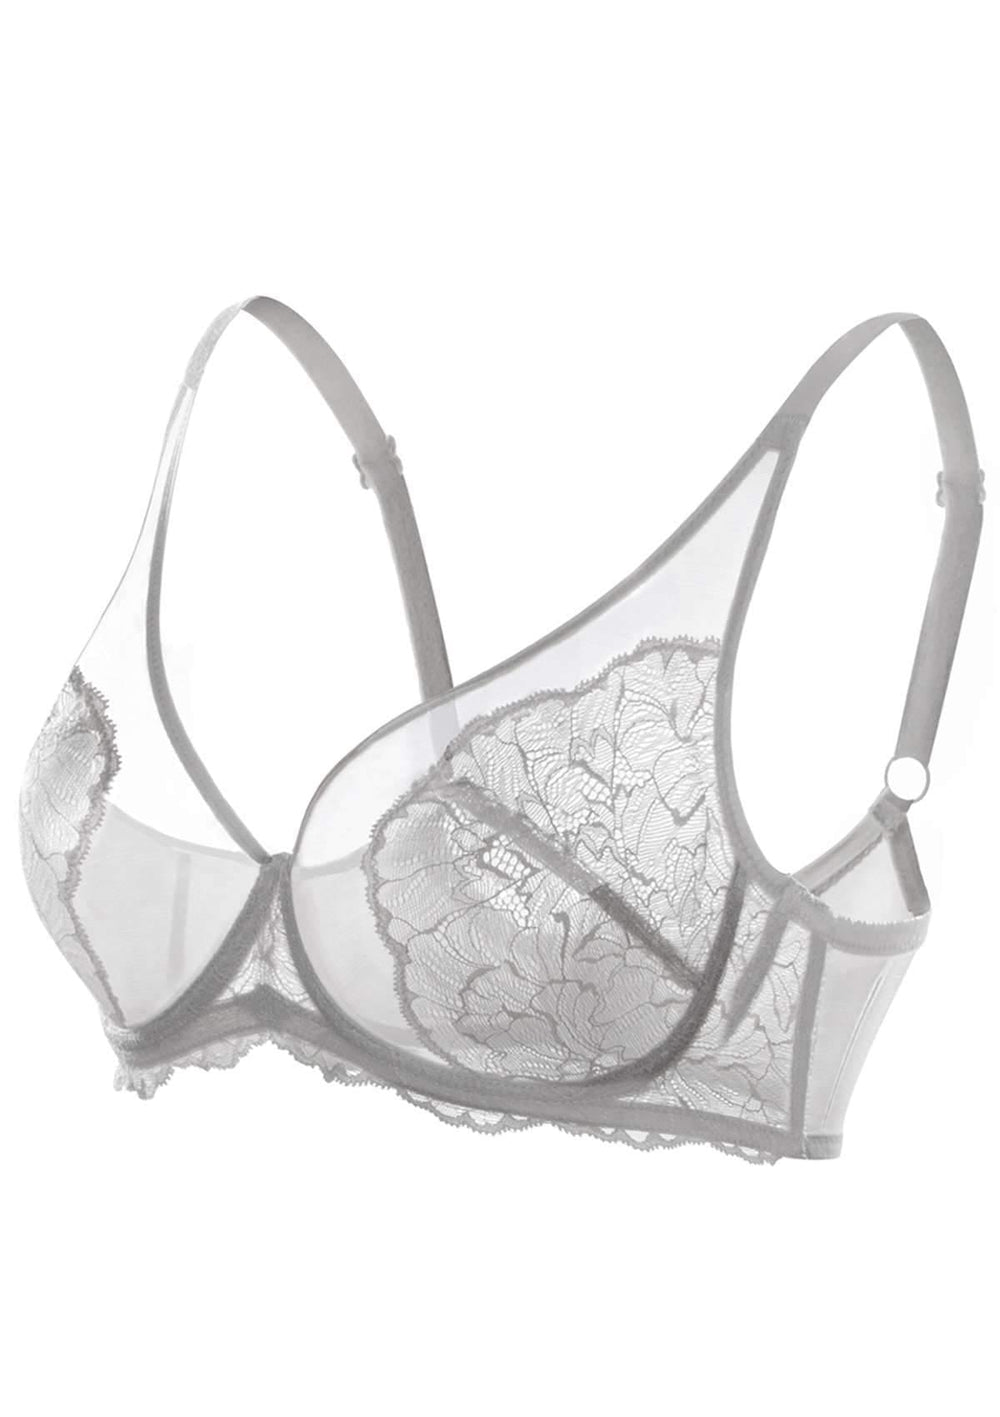 HSIA Blossom Lace Bra and Panties Set: Best Bra for Large Busts